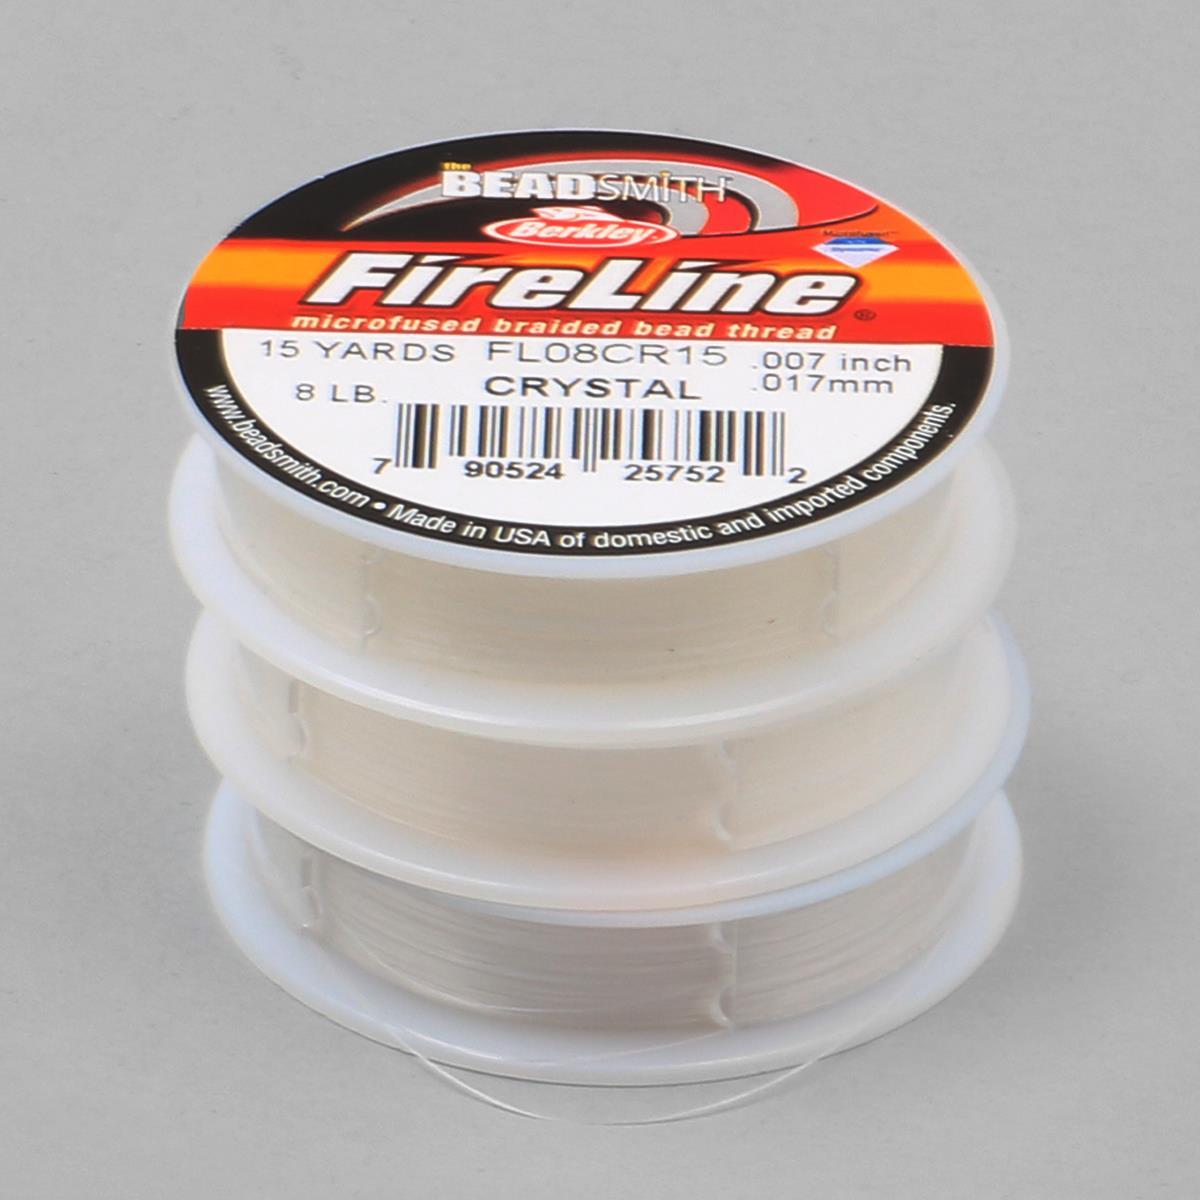 Beadsmith Fireline Threading Material Pack Clear (3pcs ...
